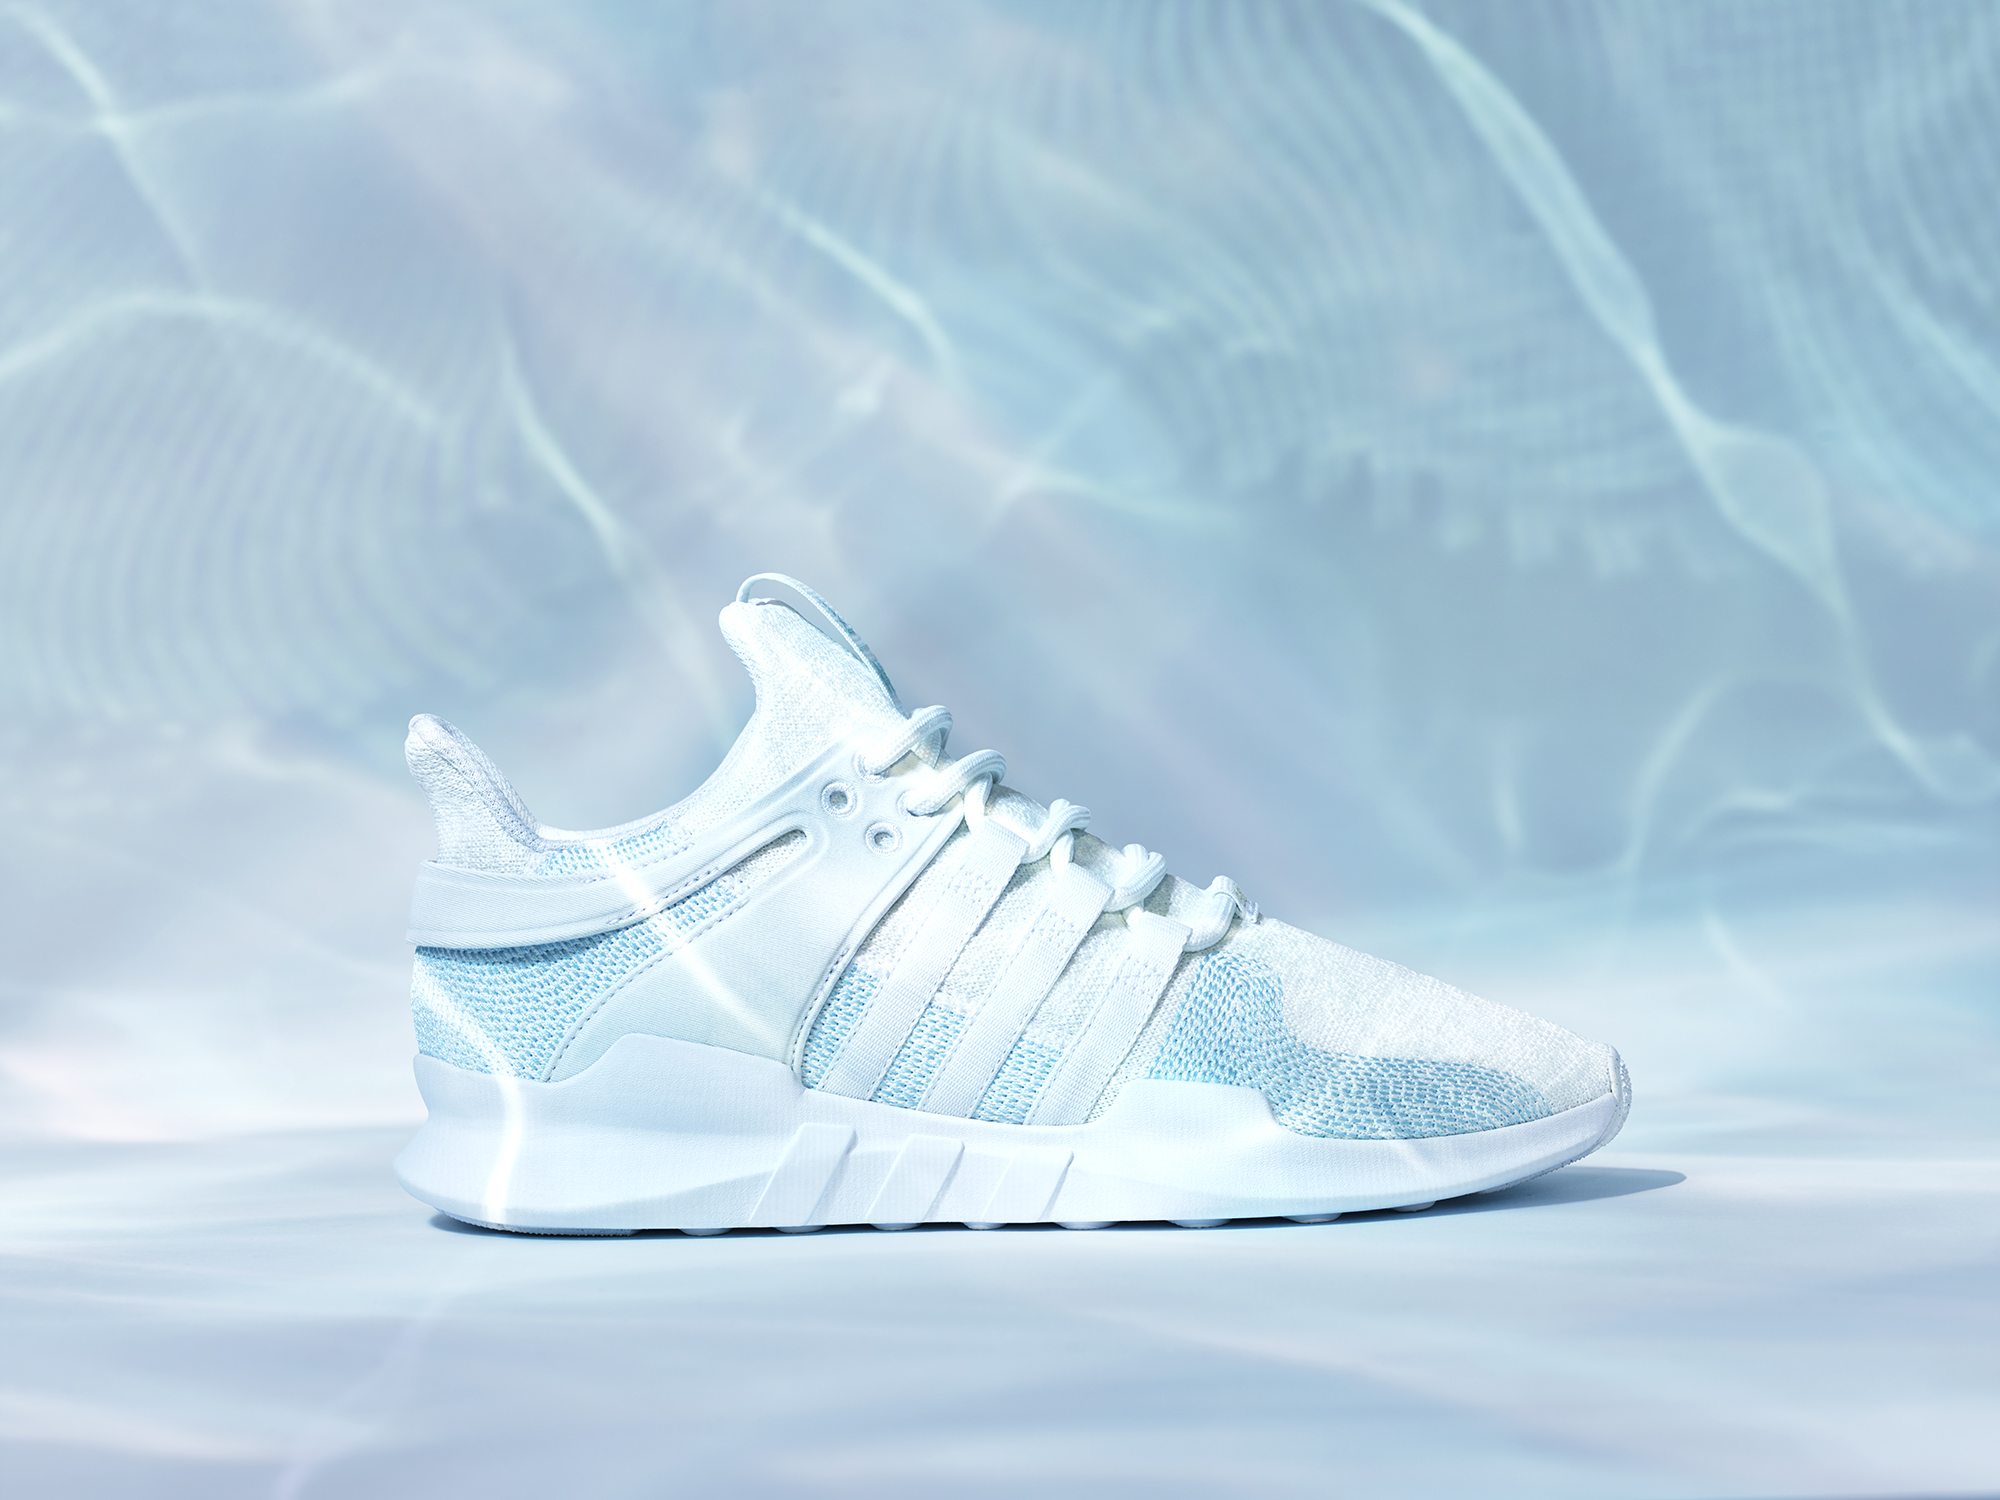 parley adidas originals EQT support ADV 2 - WearTesters